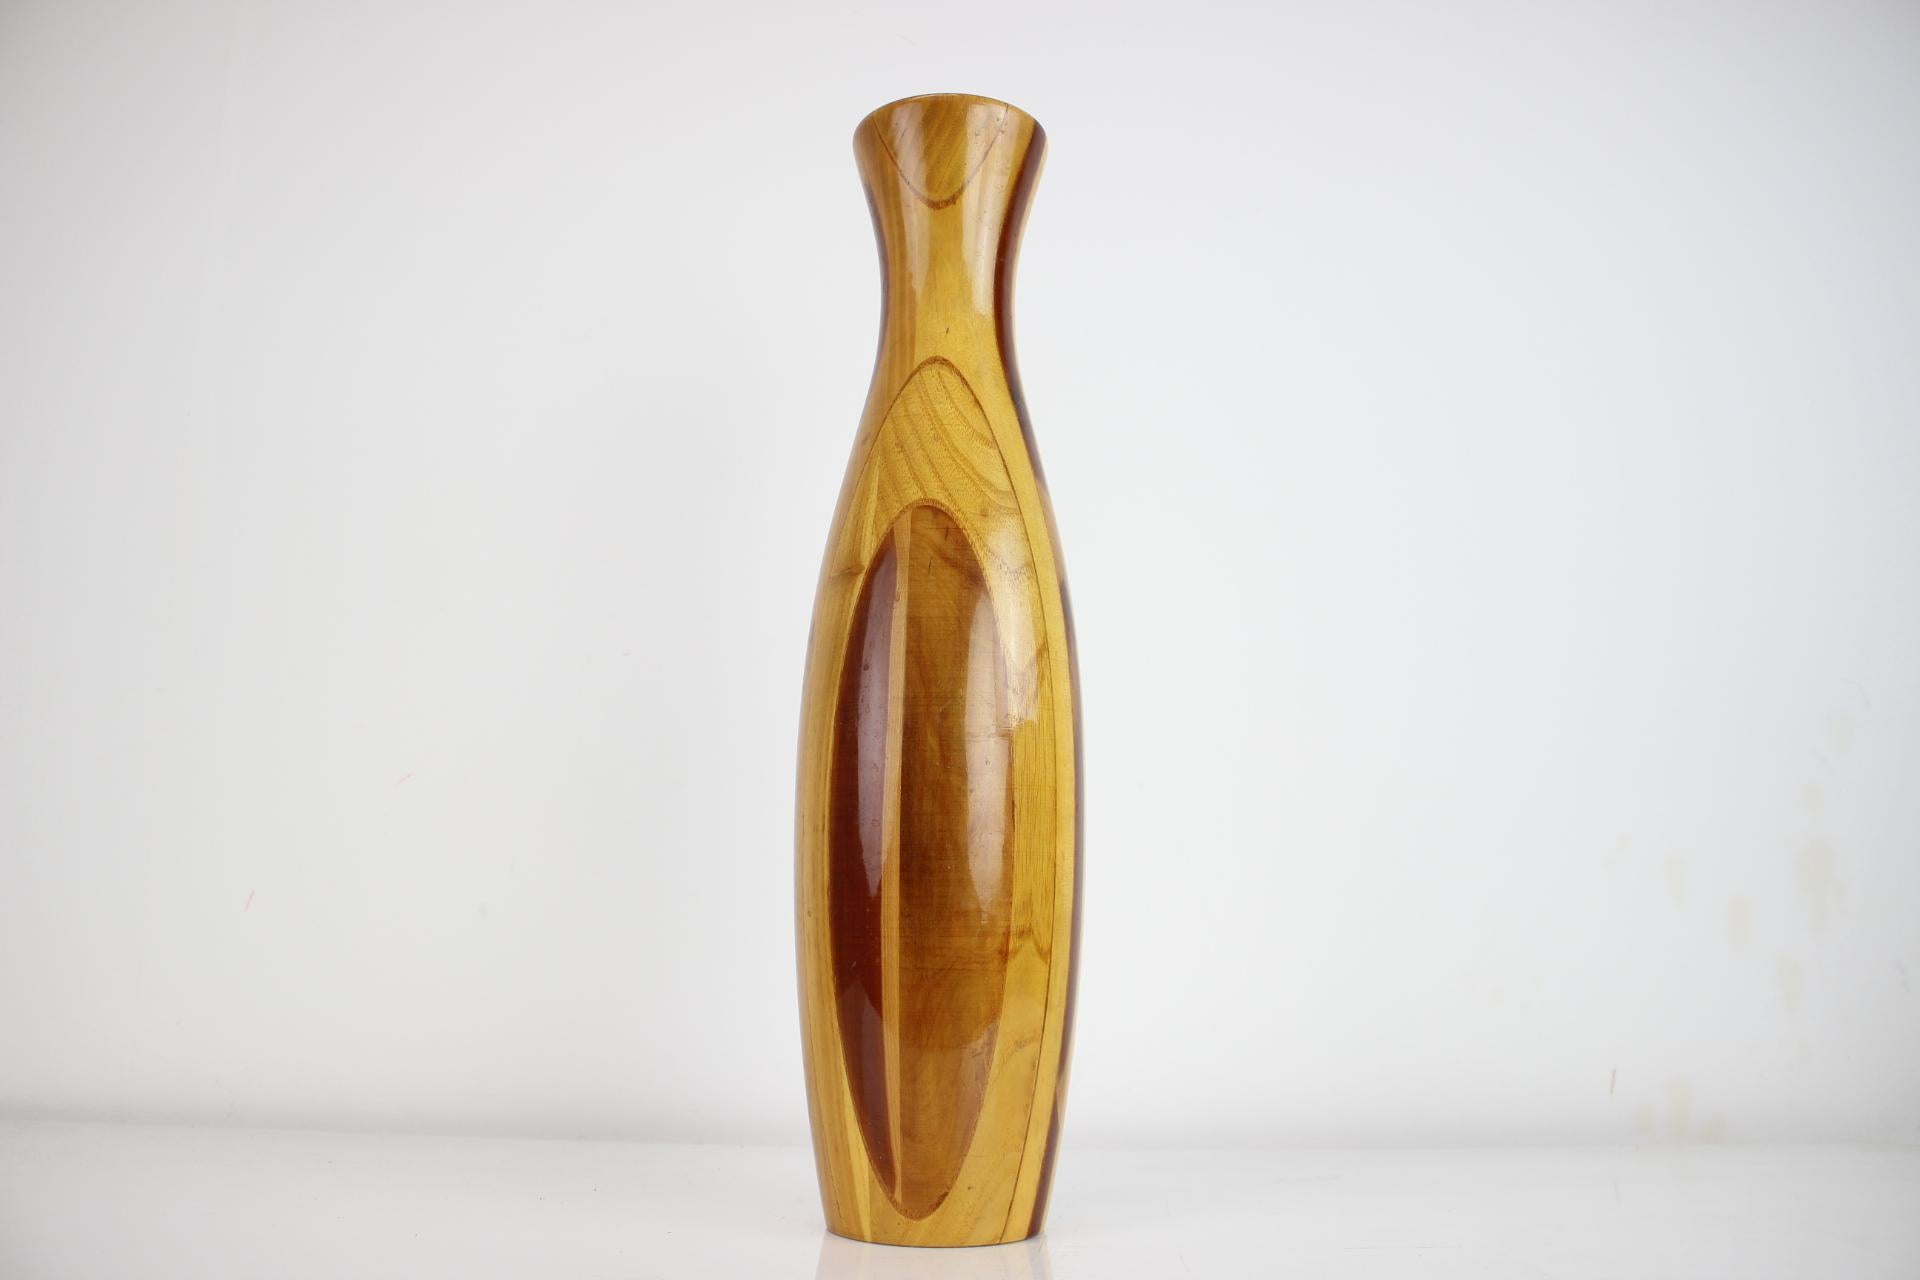 - Goog original condition with minor signs of use.
- The vase is made of more wood